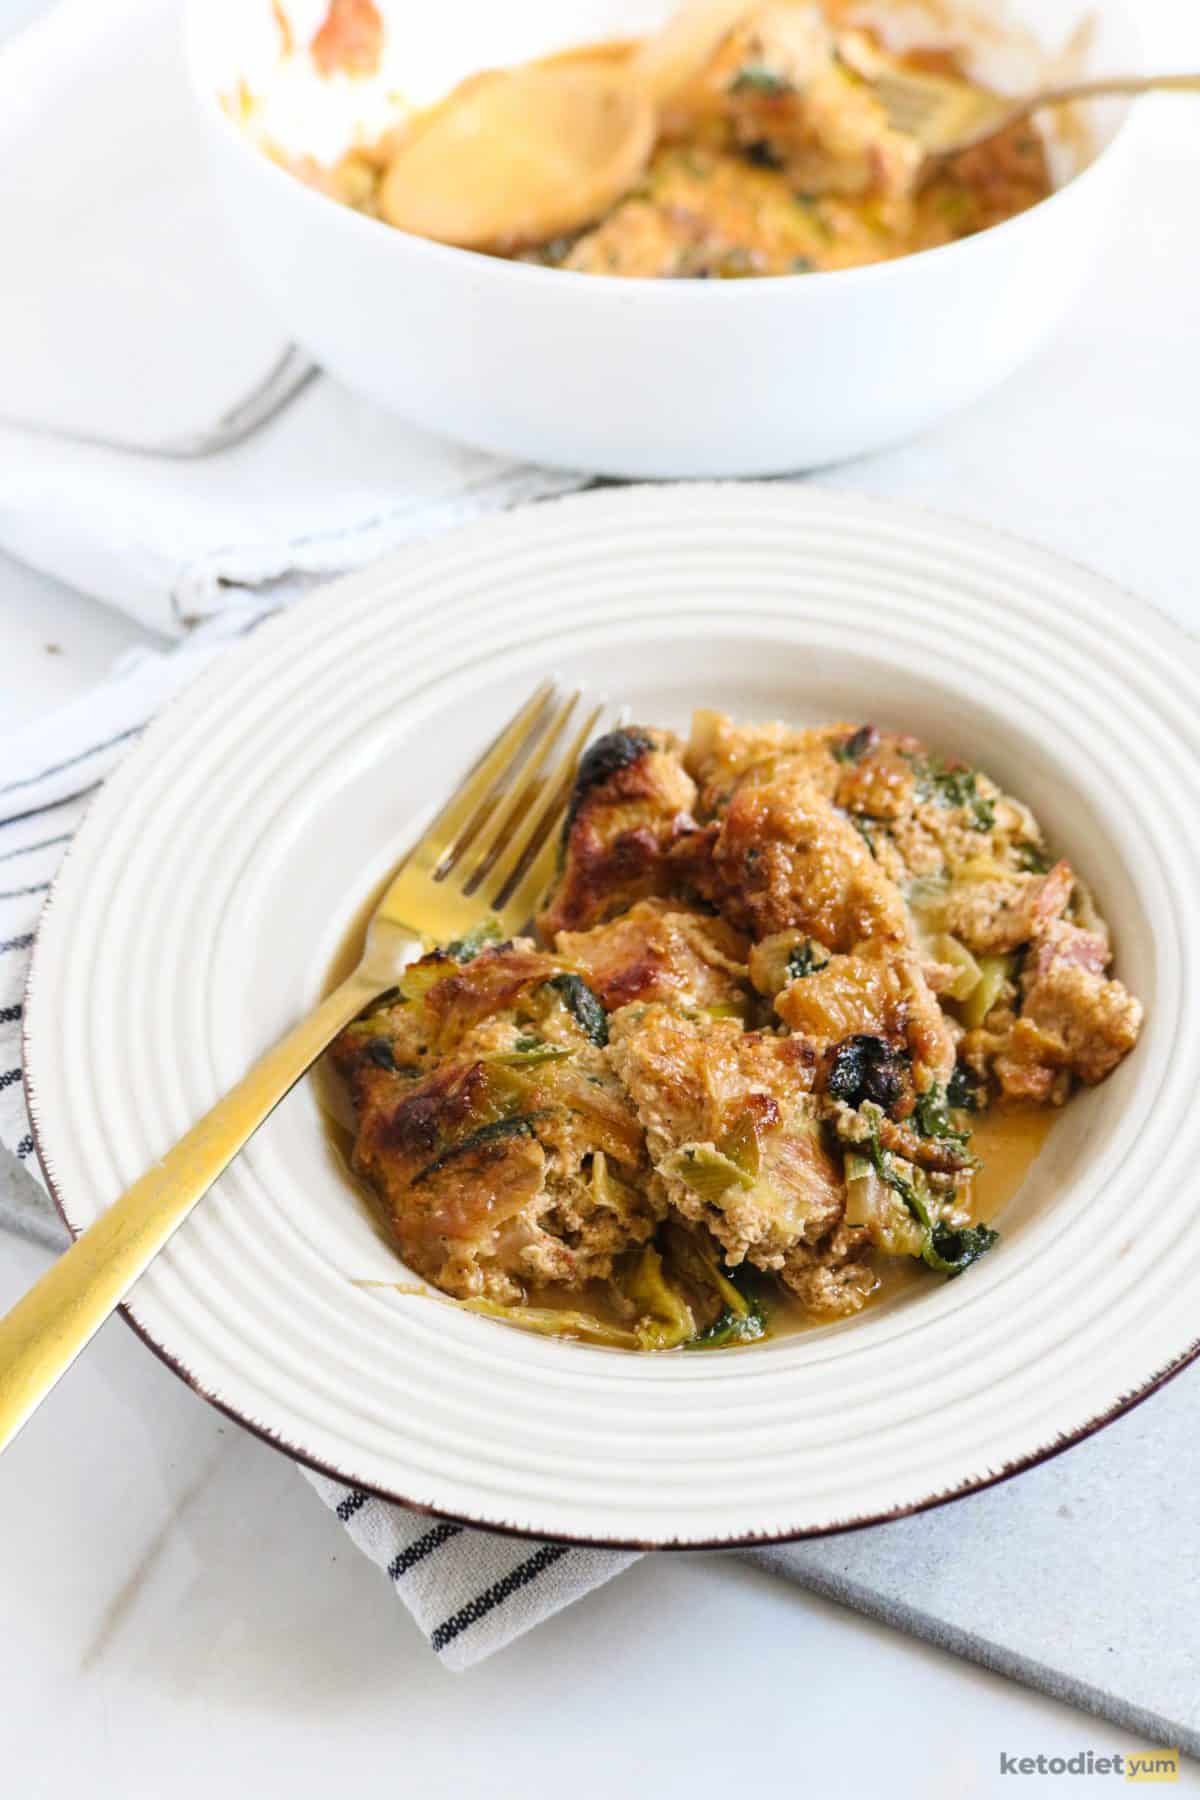 A delicious low carb keto casserole made with chicken, bacon, onions, leeks and spinach